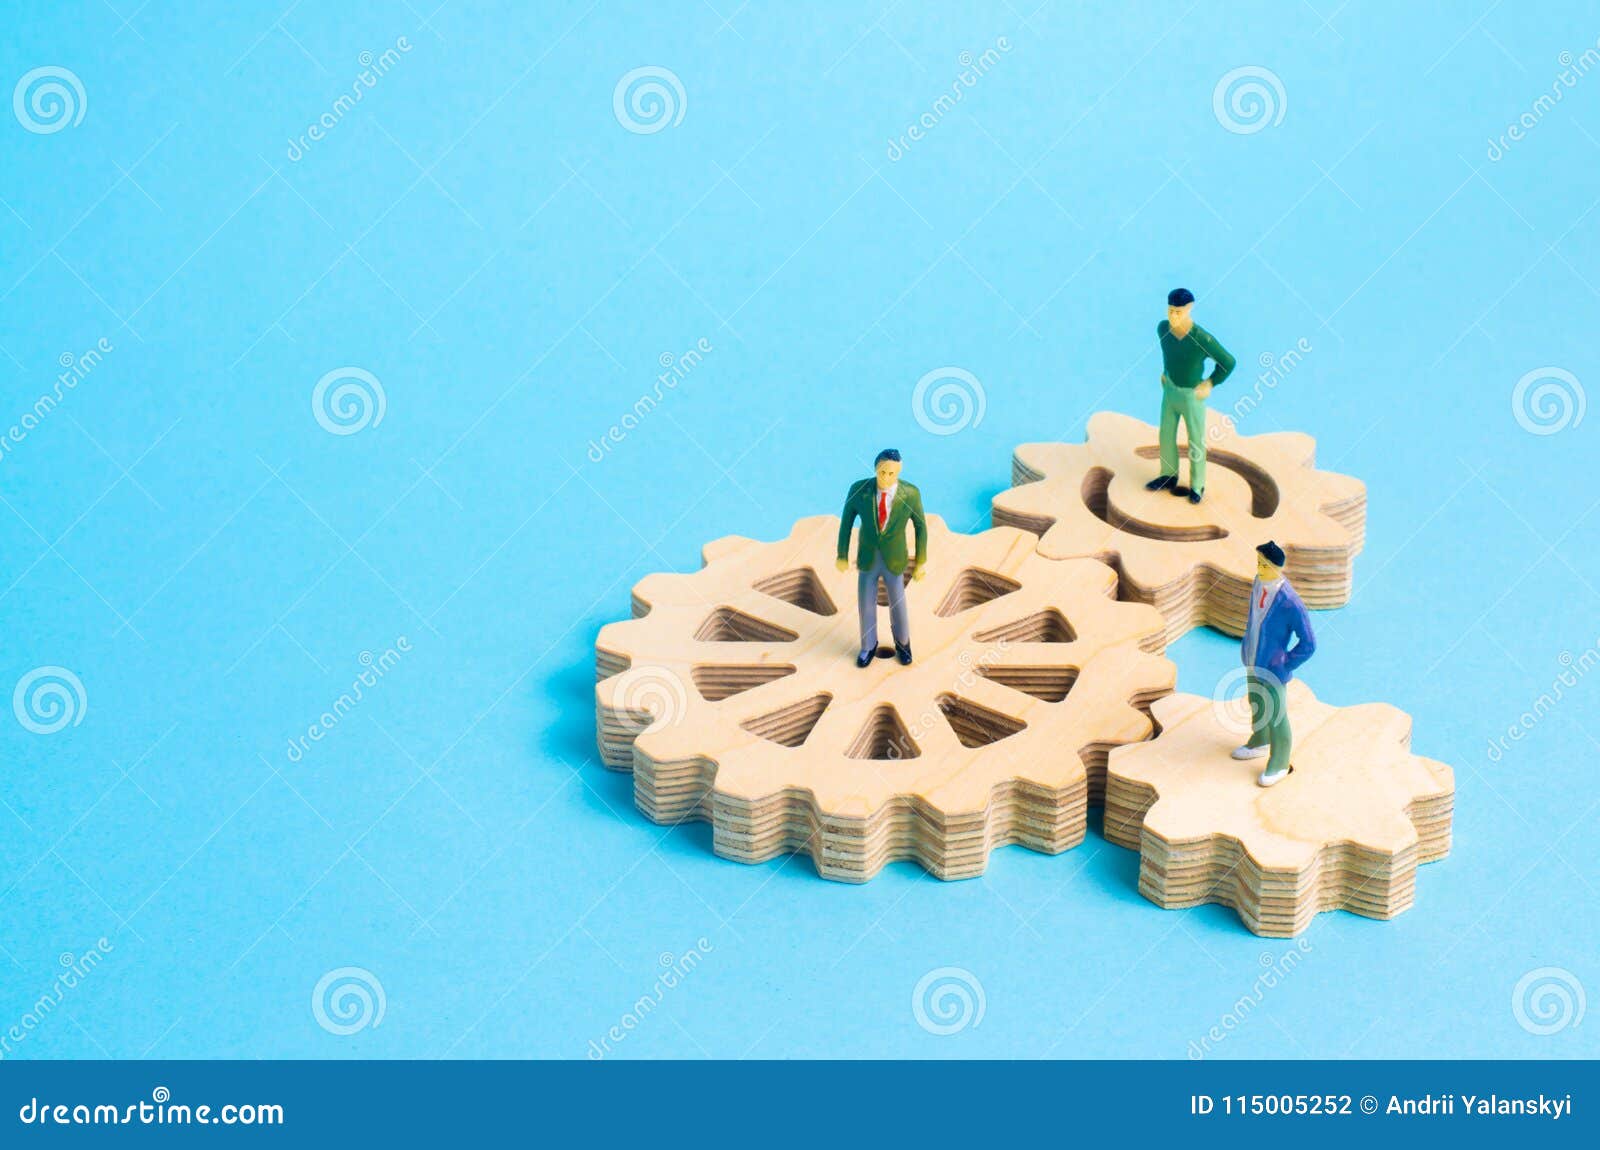 people stand on gears. concept of business ideas and investments, cooperation and teamwork with business partners and employees.